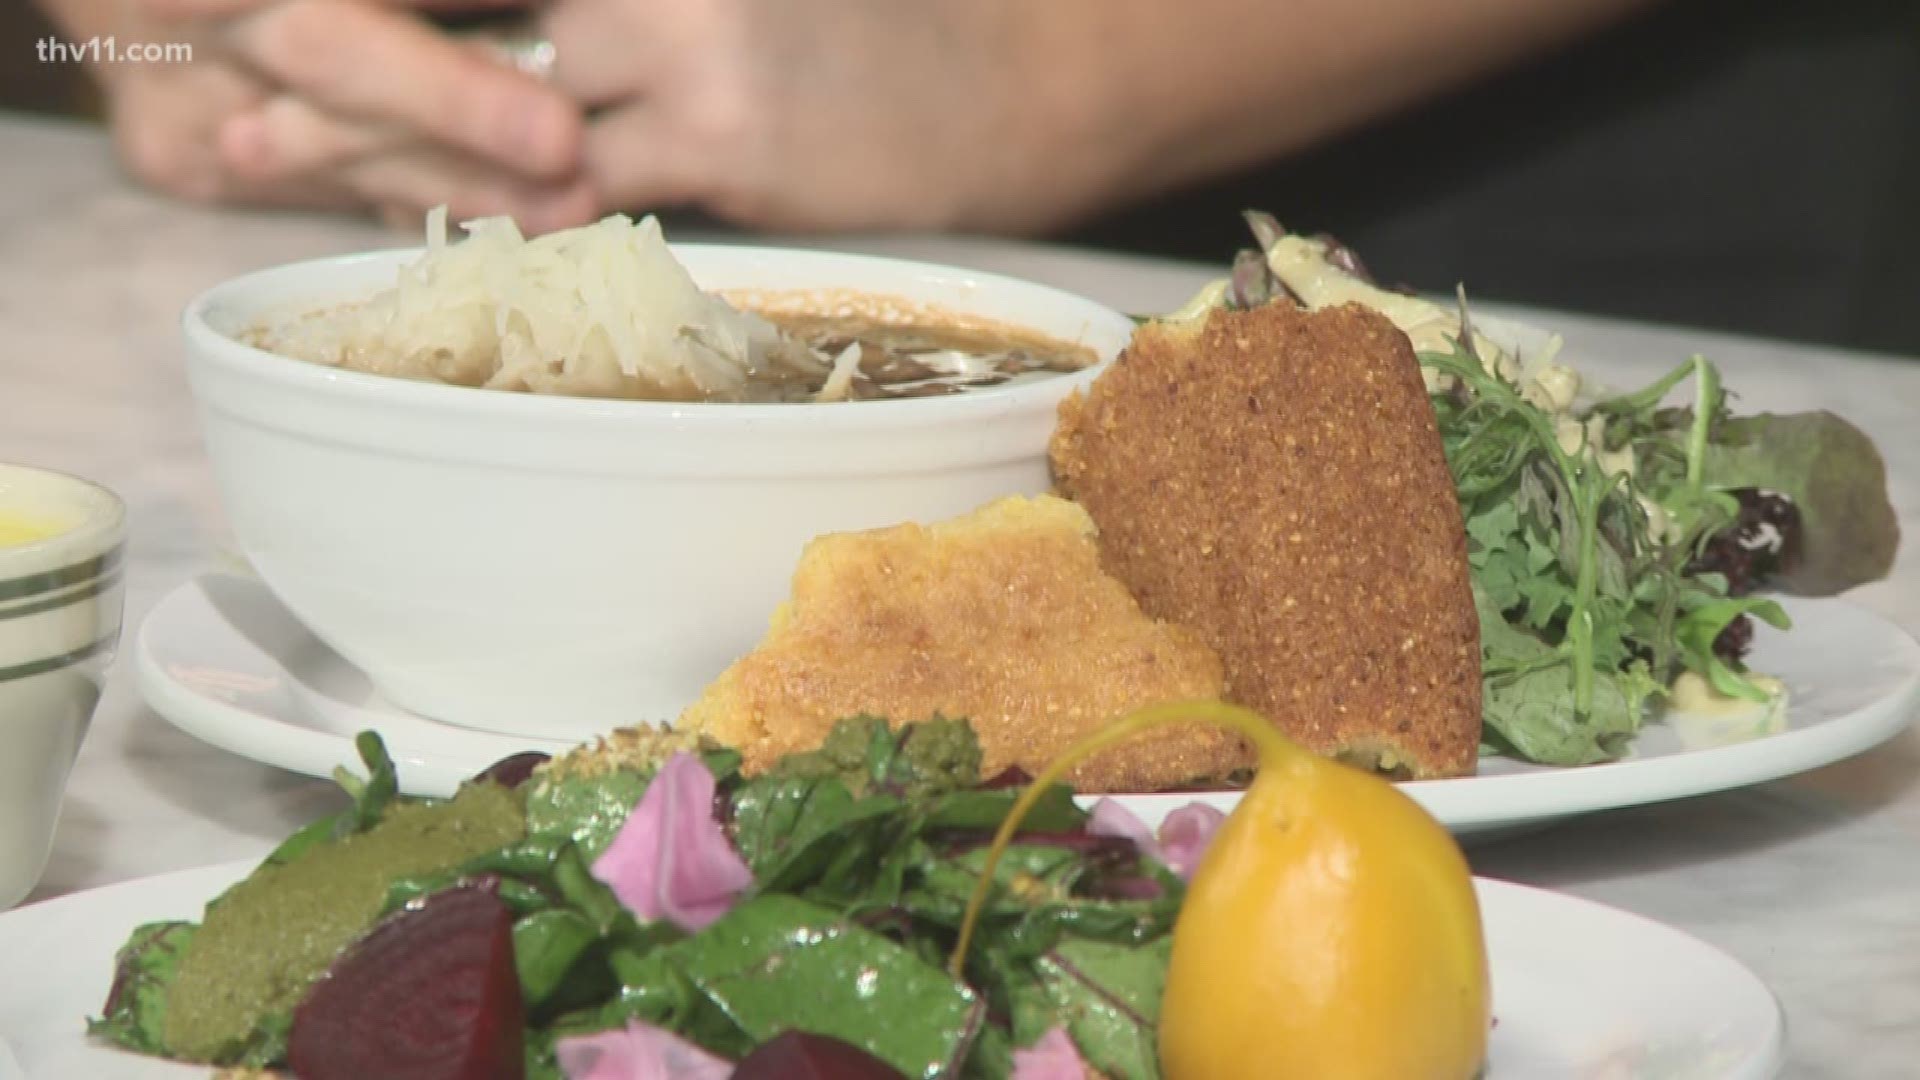 The Root specializes in locally sourced food, including many vegan and vegetarian dishes.